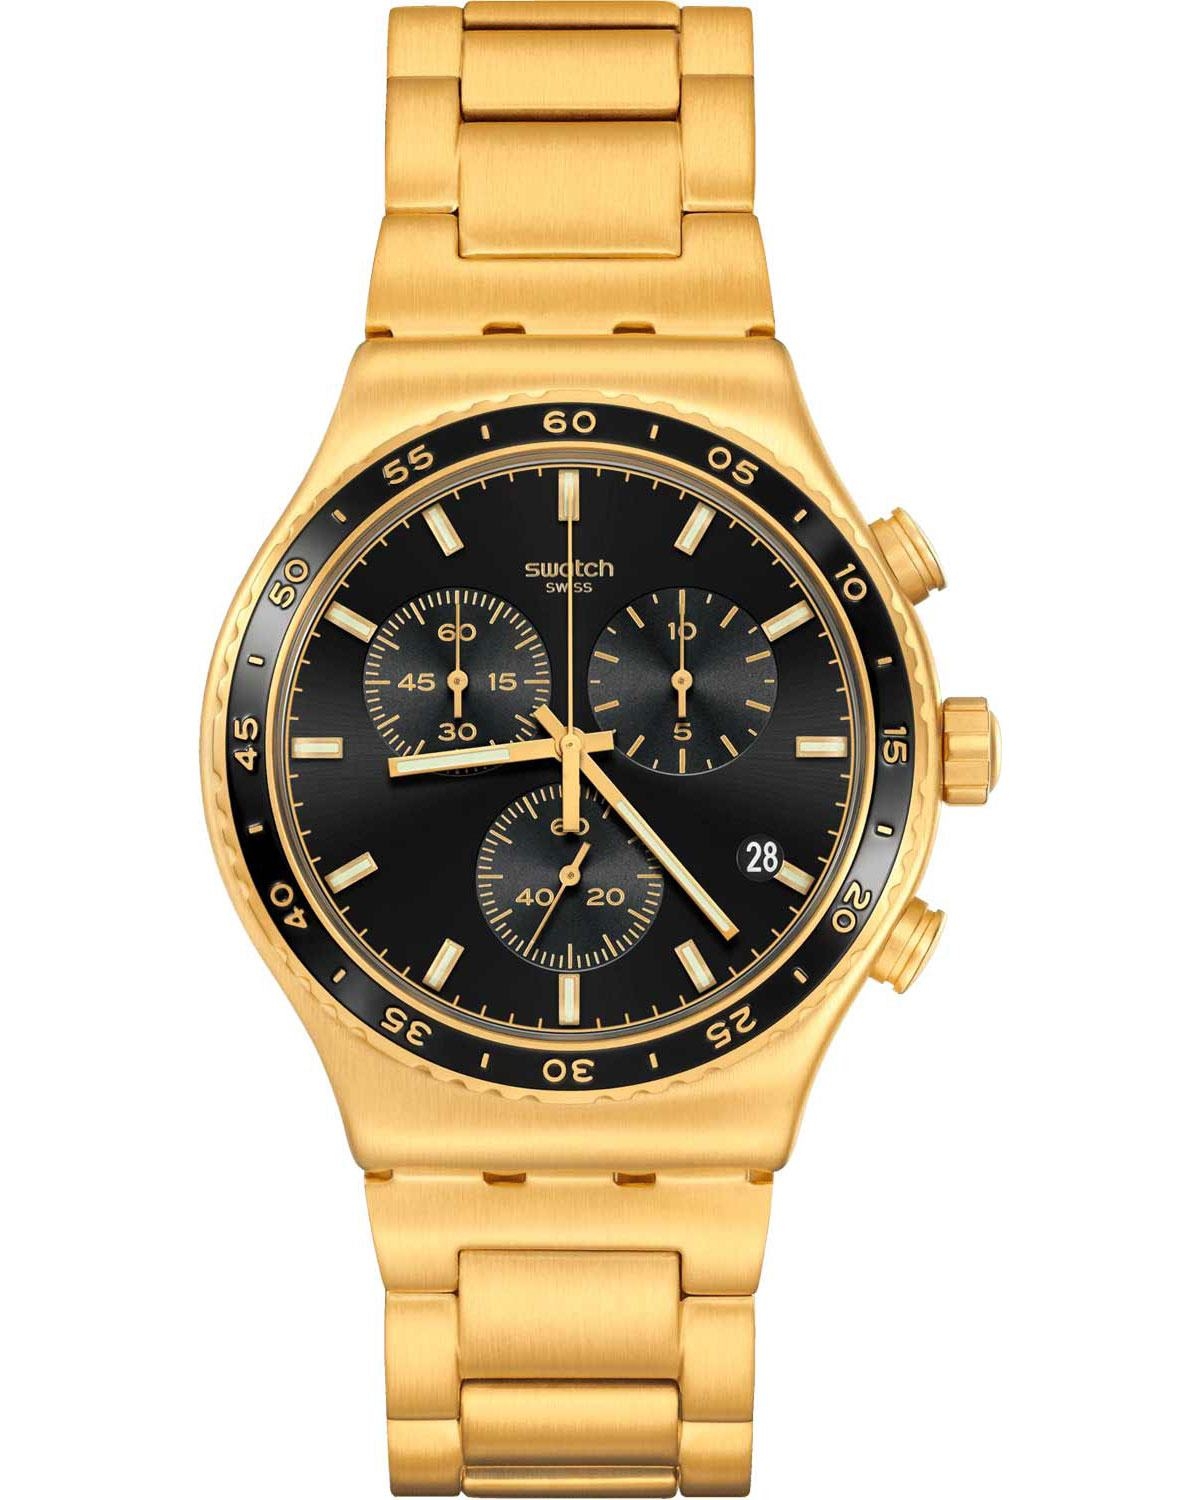 swatch in the black chronograph yvg418g gold case with stainless steel bracelet image1